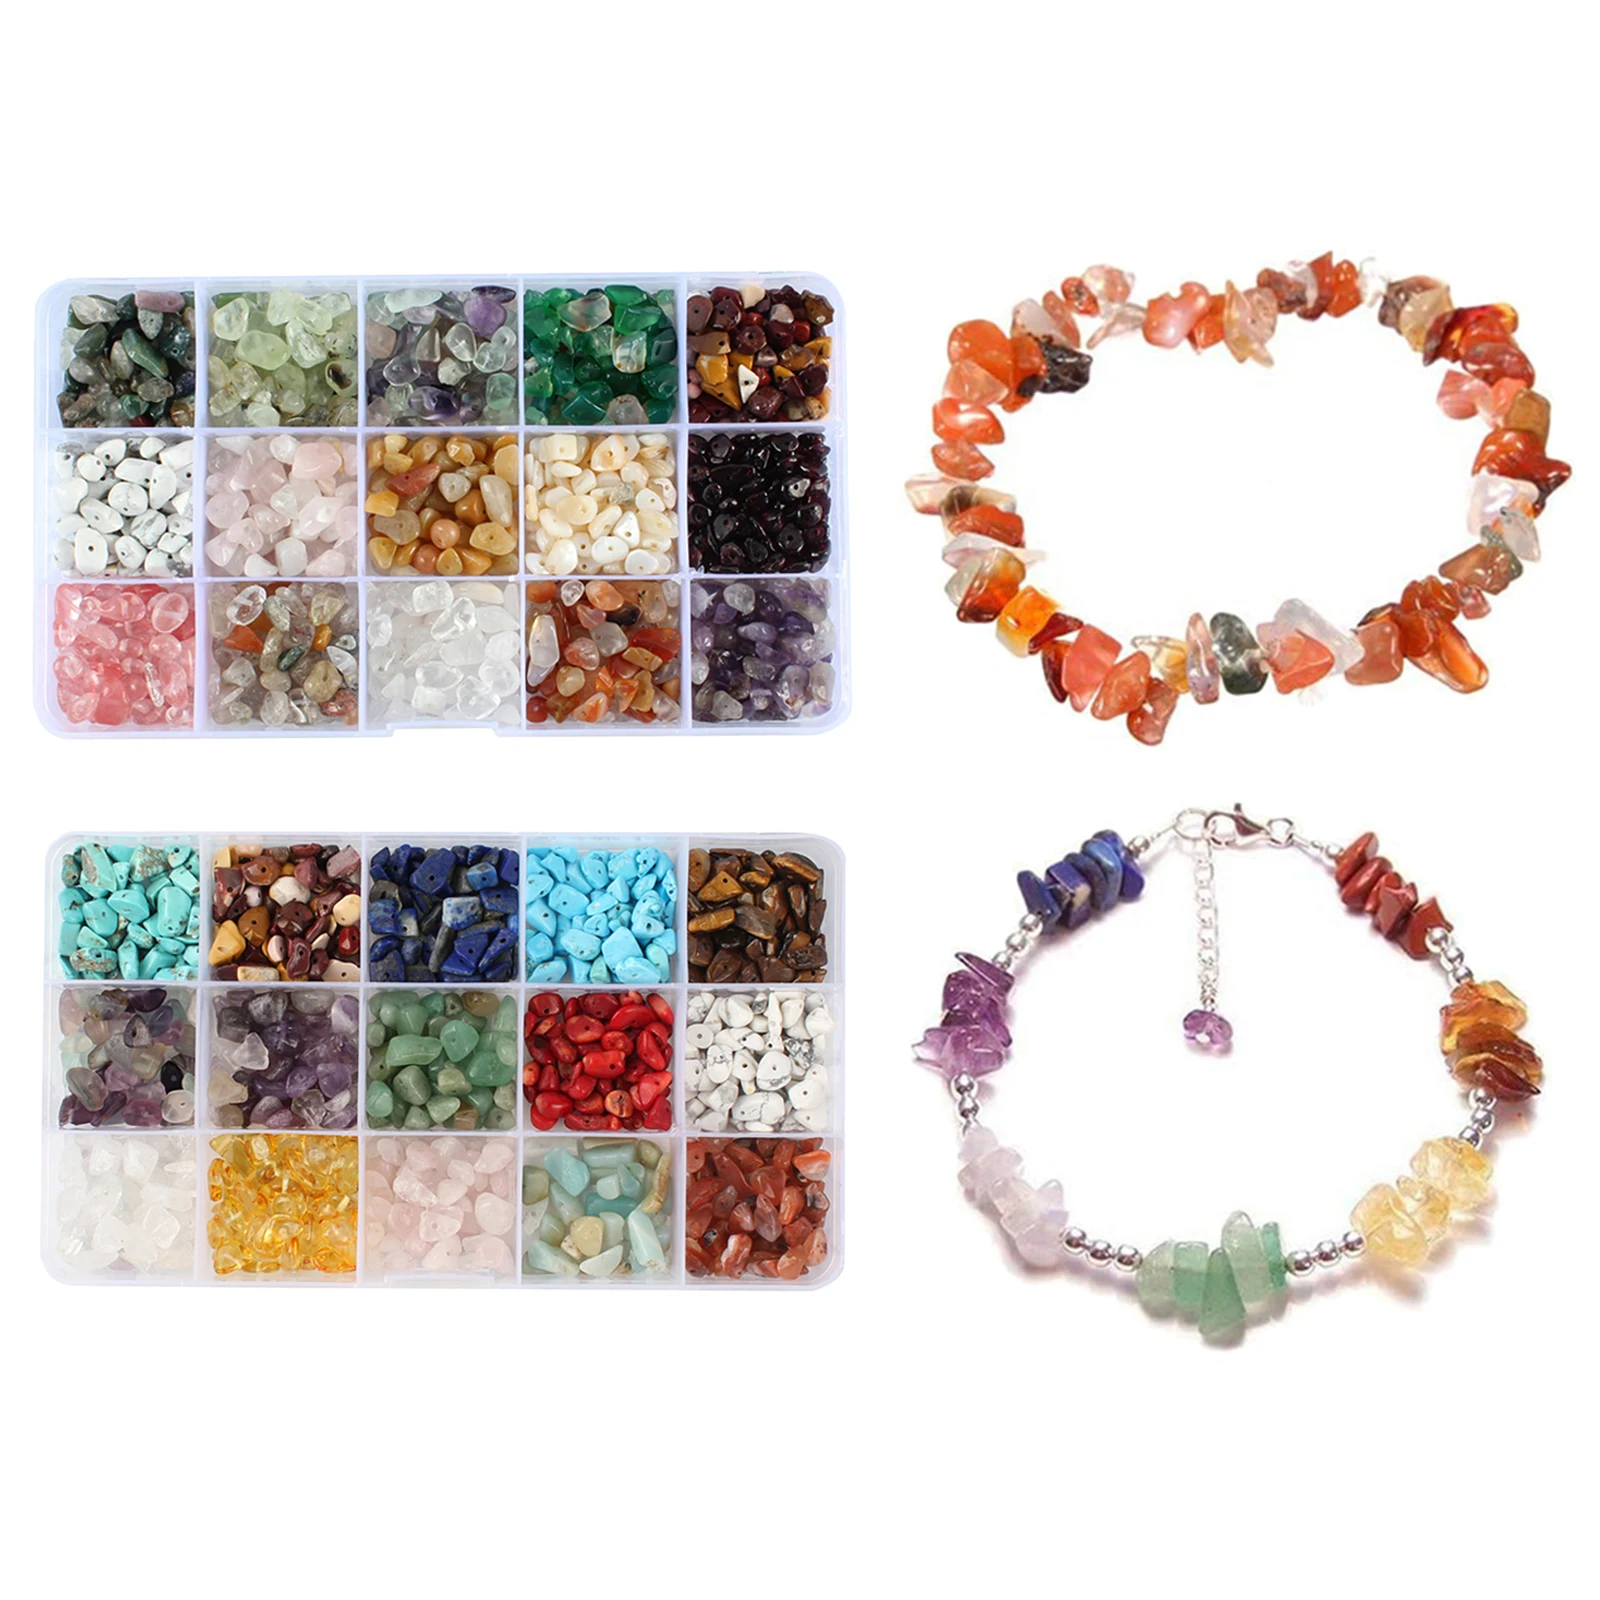 15 Colors Assorted Gemstone Beads Irregular Shaped Natural Chips Kit for DIY Craft Bracelets Necklaces Pendant Jewelry Making